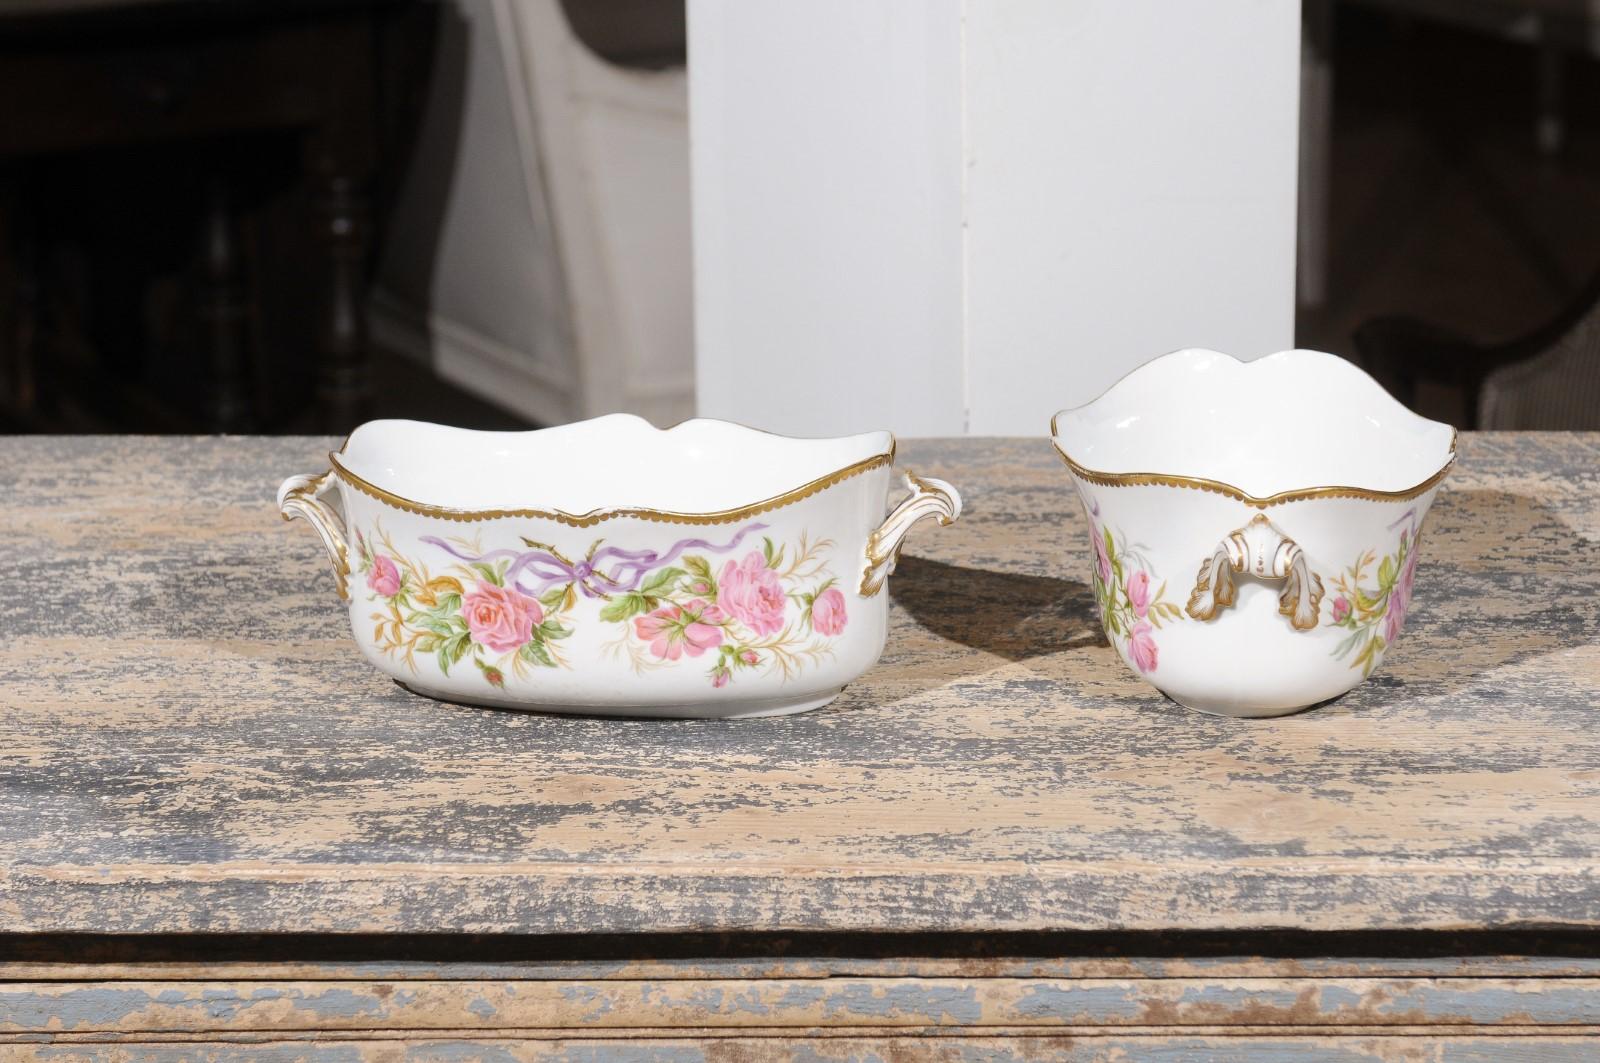 English Porcelain Bowls Depicting Bouquets of Pink Roses with Gilt Accents For Sale 5